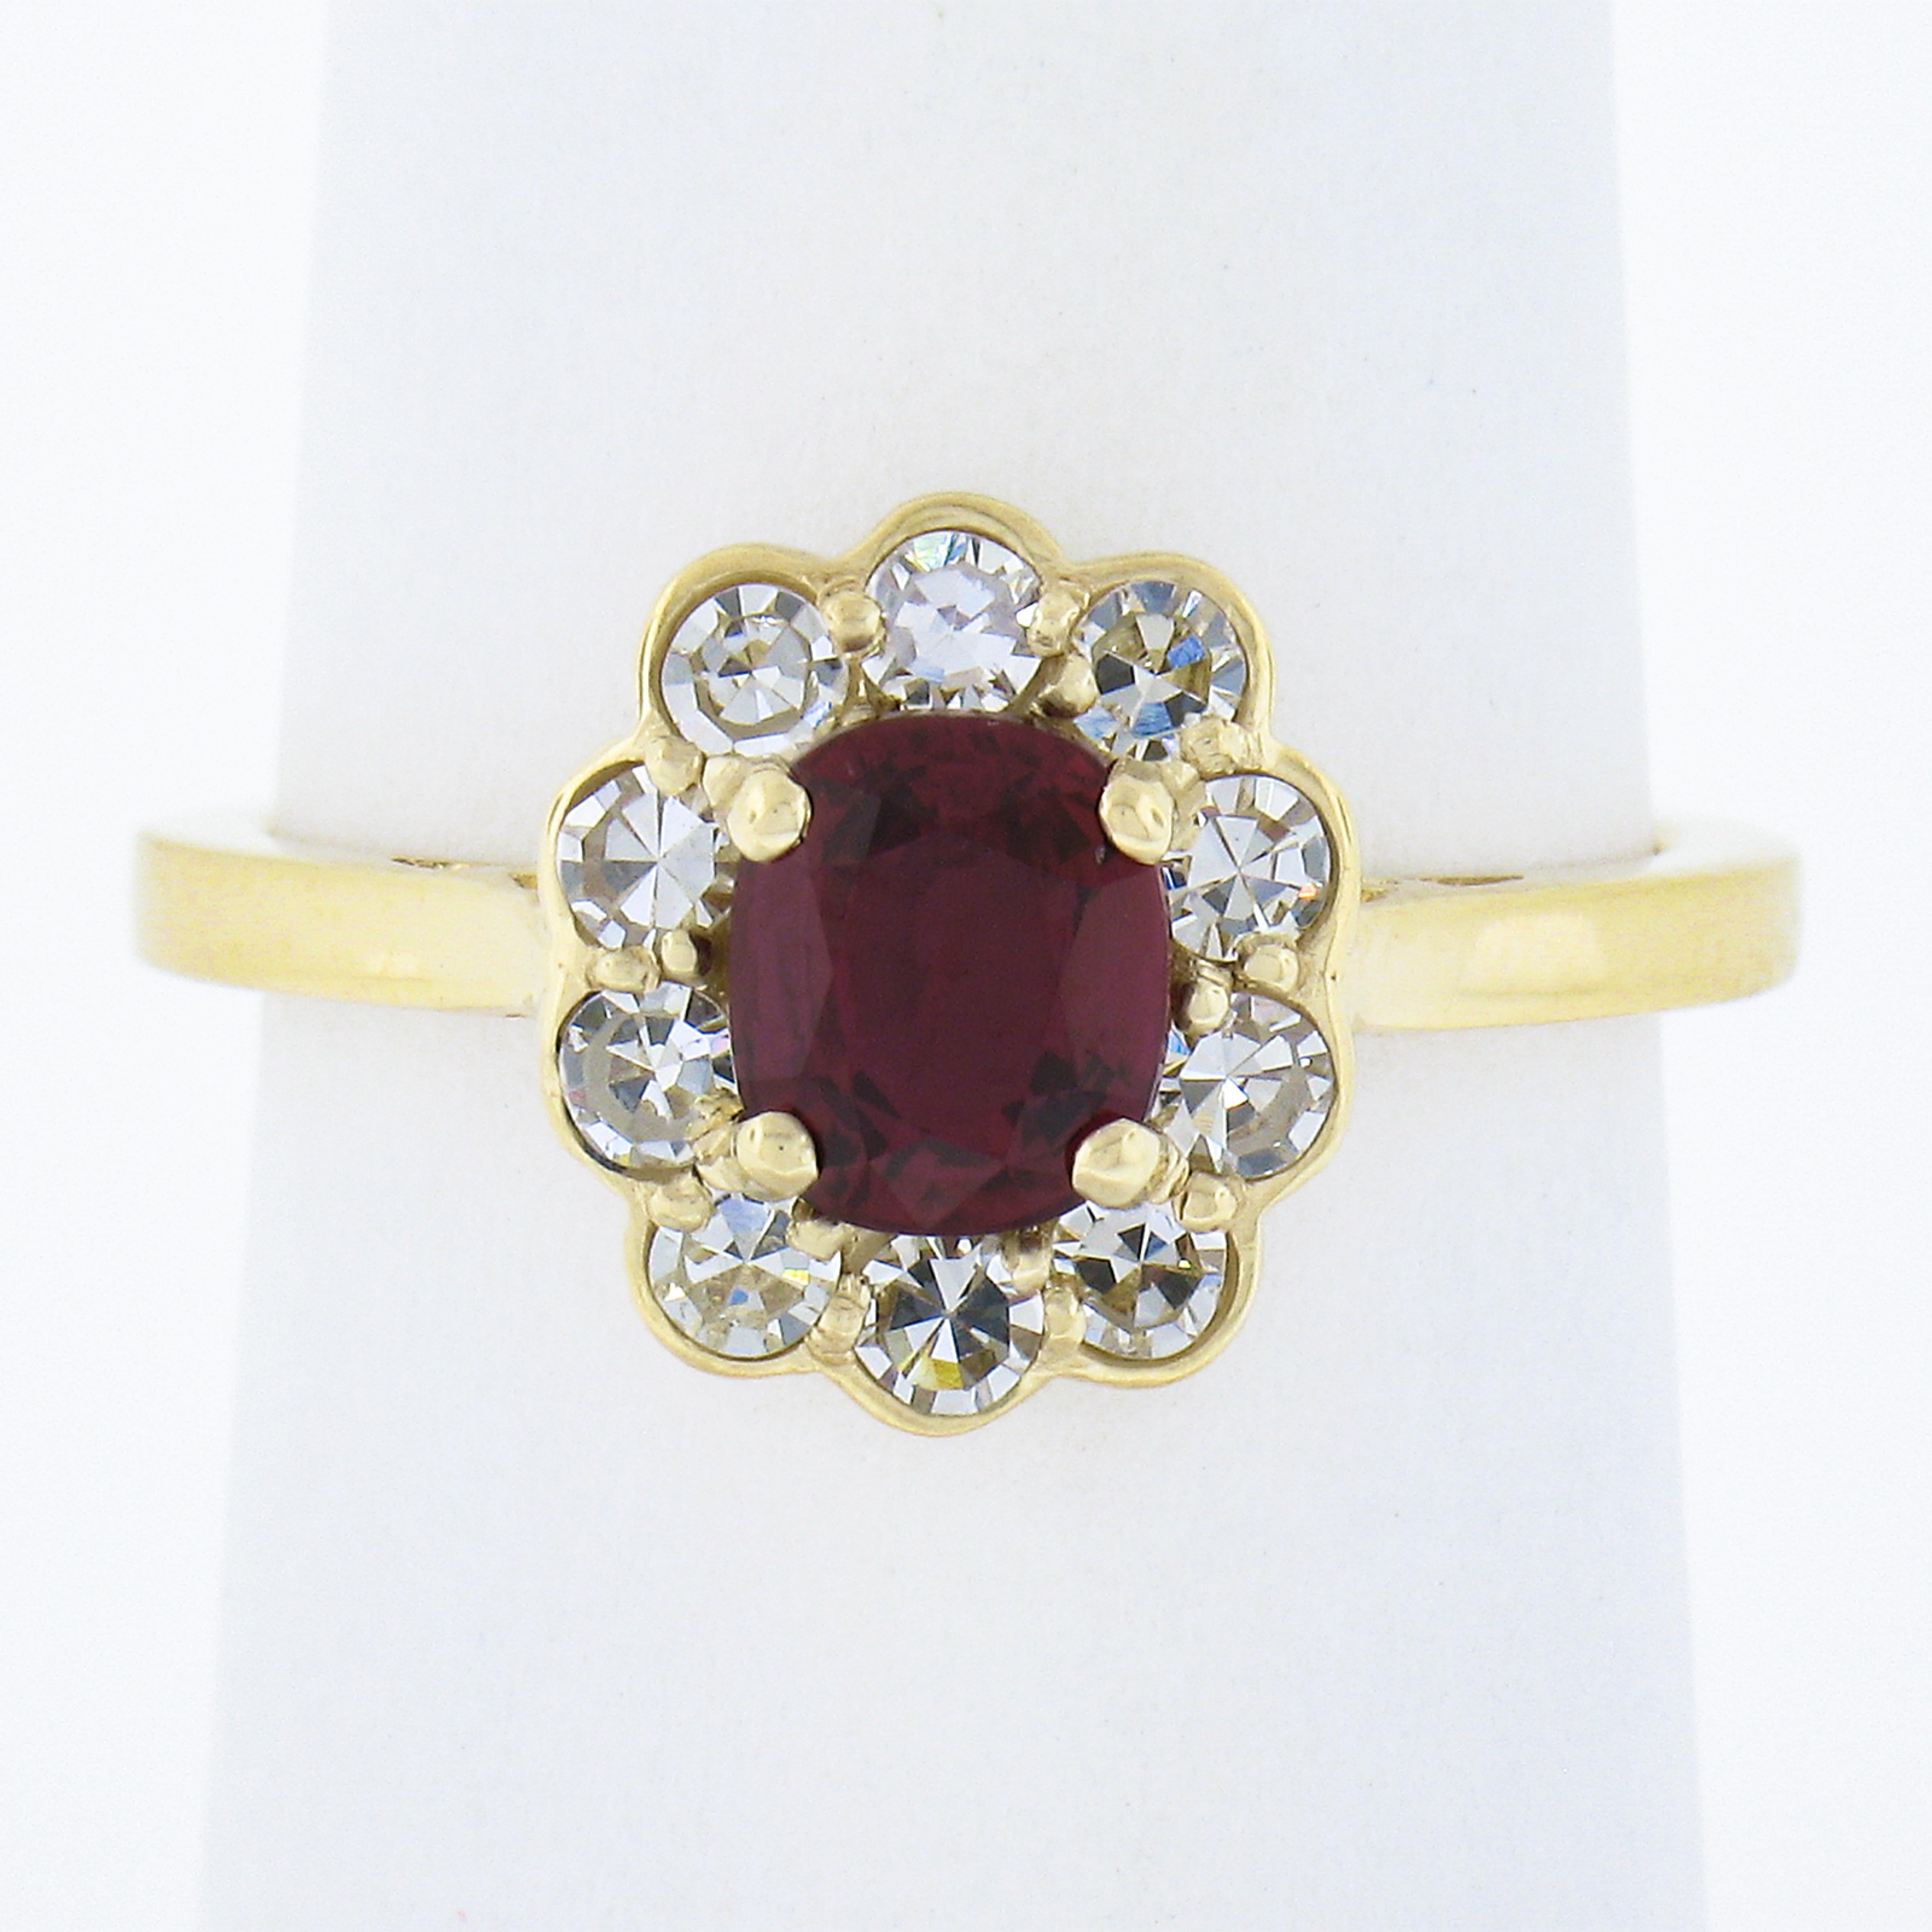 This adorable custom made ruby and diamond flower ring is well crafted in solid 18k yellow gold. The elegant flower cluster design is set with a GIA certified, natural ruby stone that displays truly mesmerizing, vivid, super fine red color and has